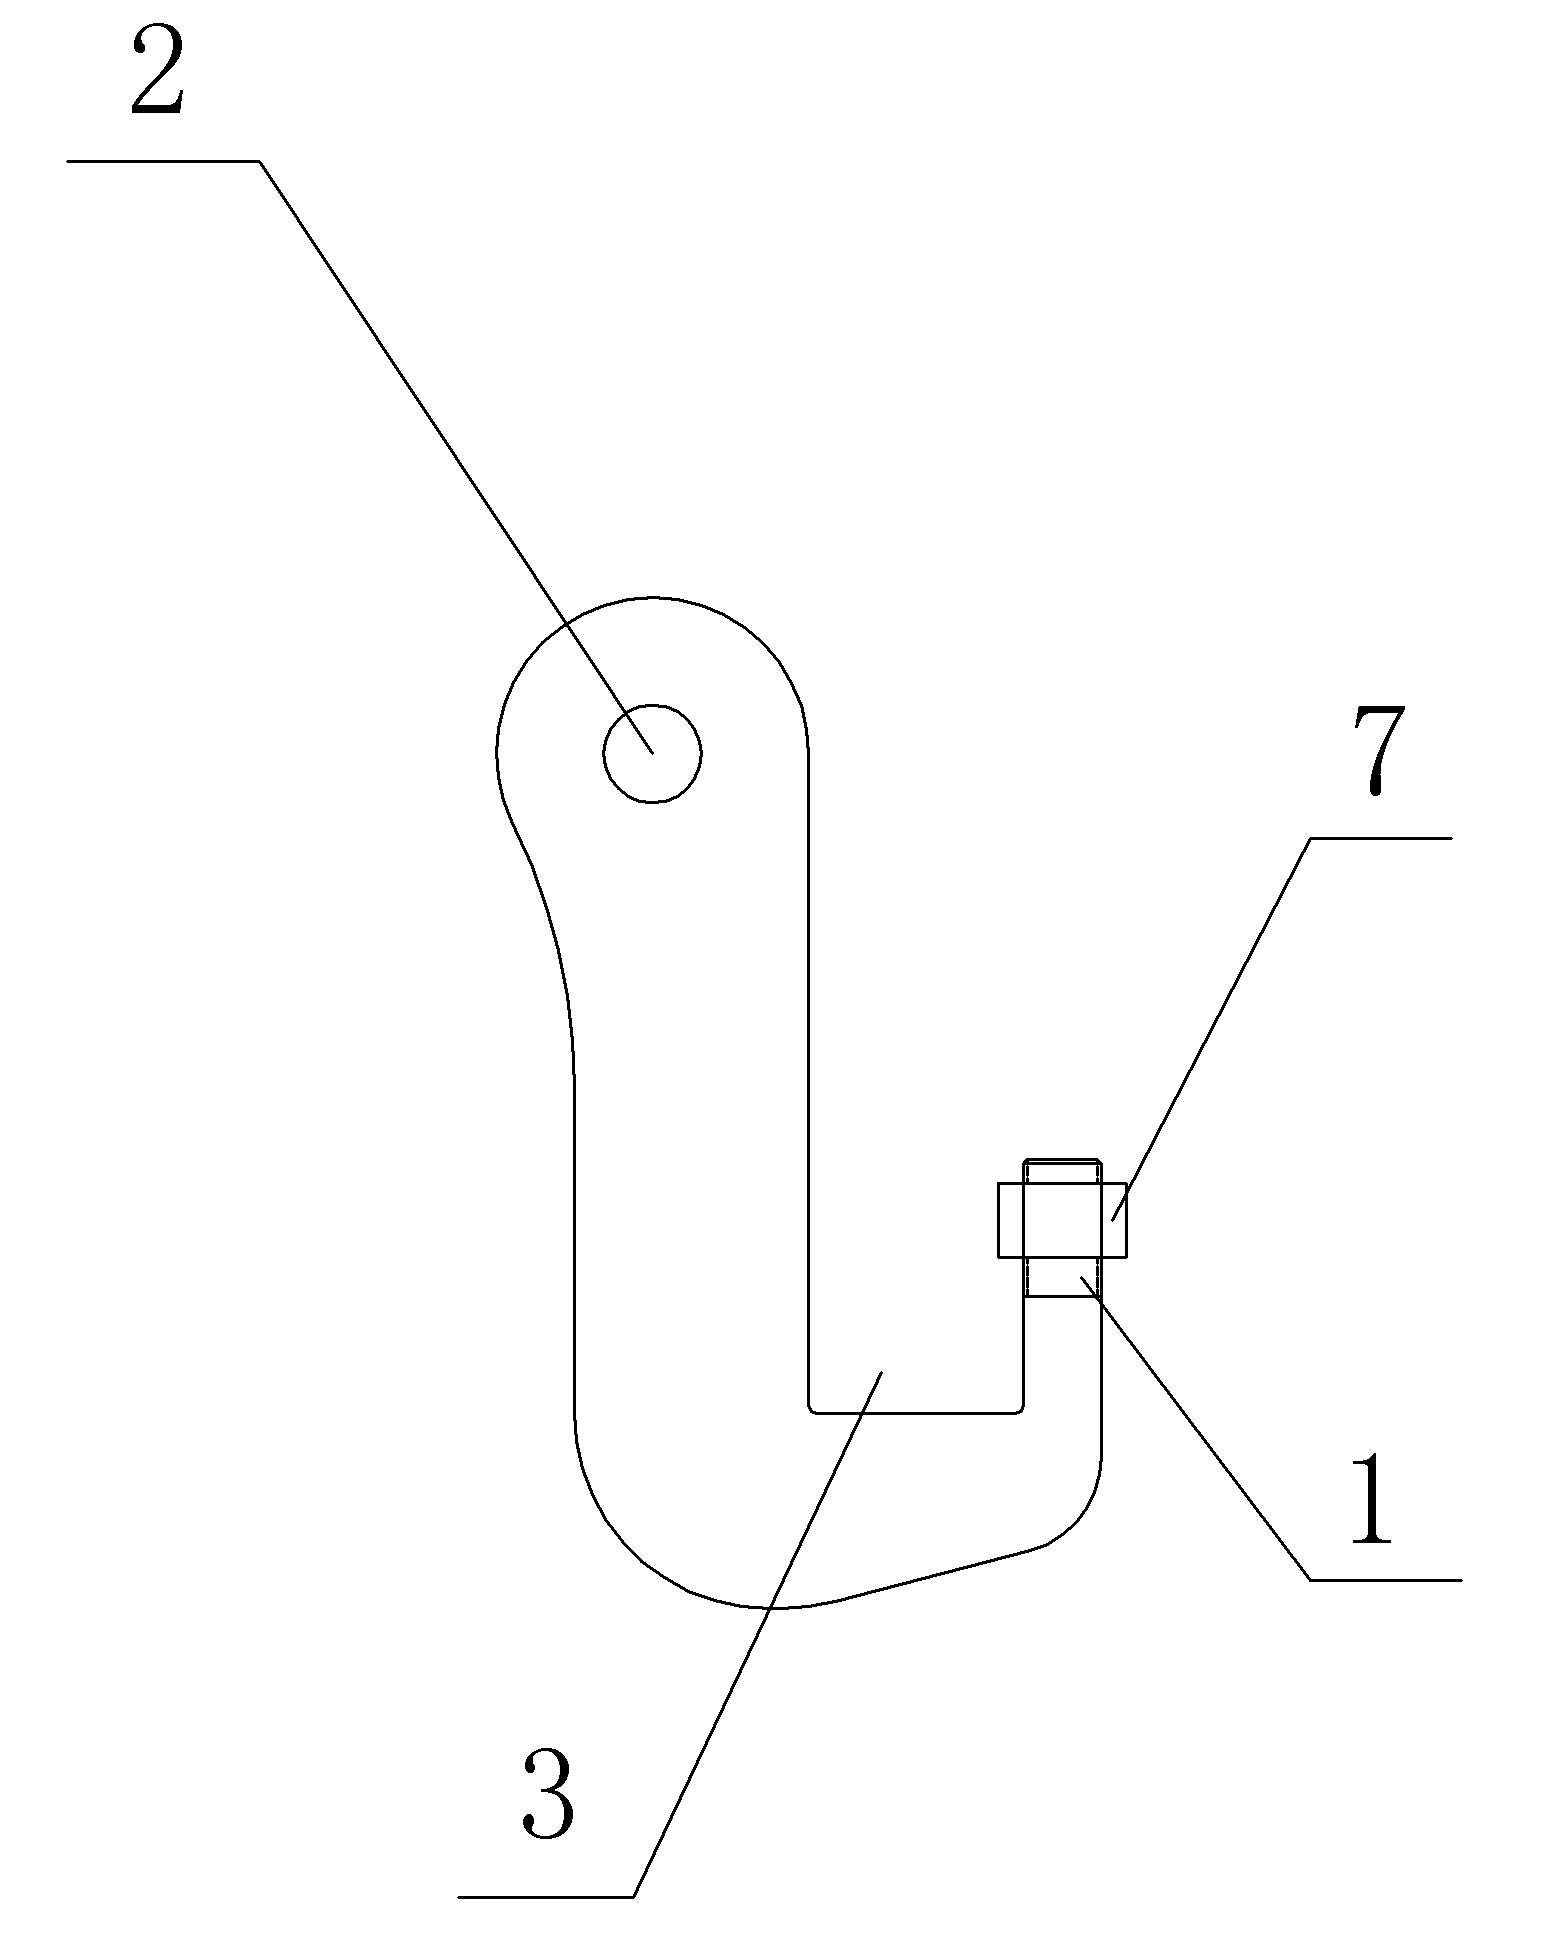 Special lifting appliance for H-shaped steel beam and lifting method using lifting appliance